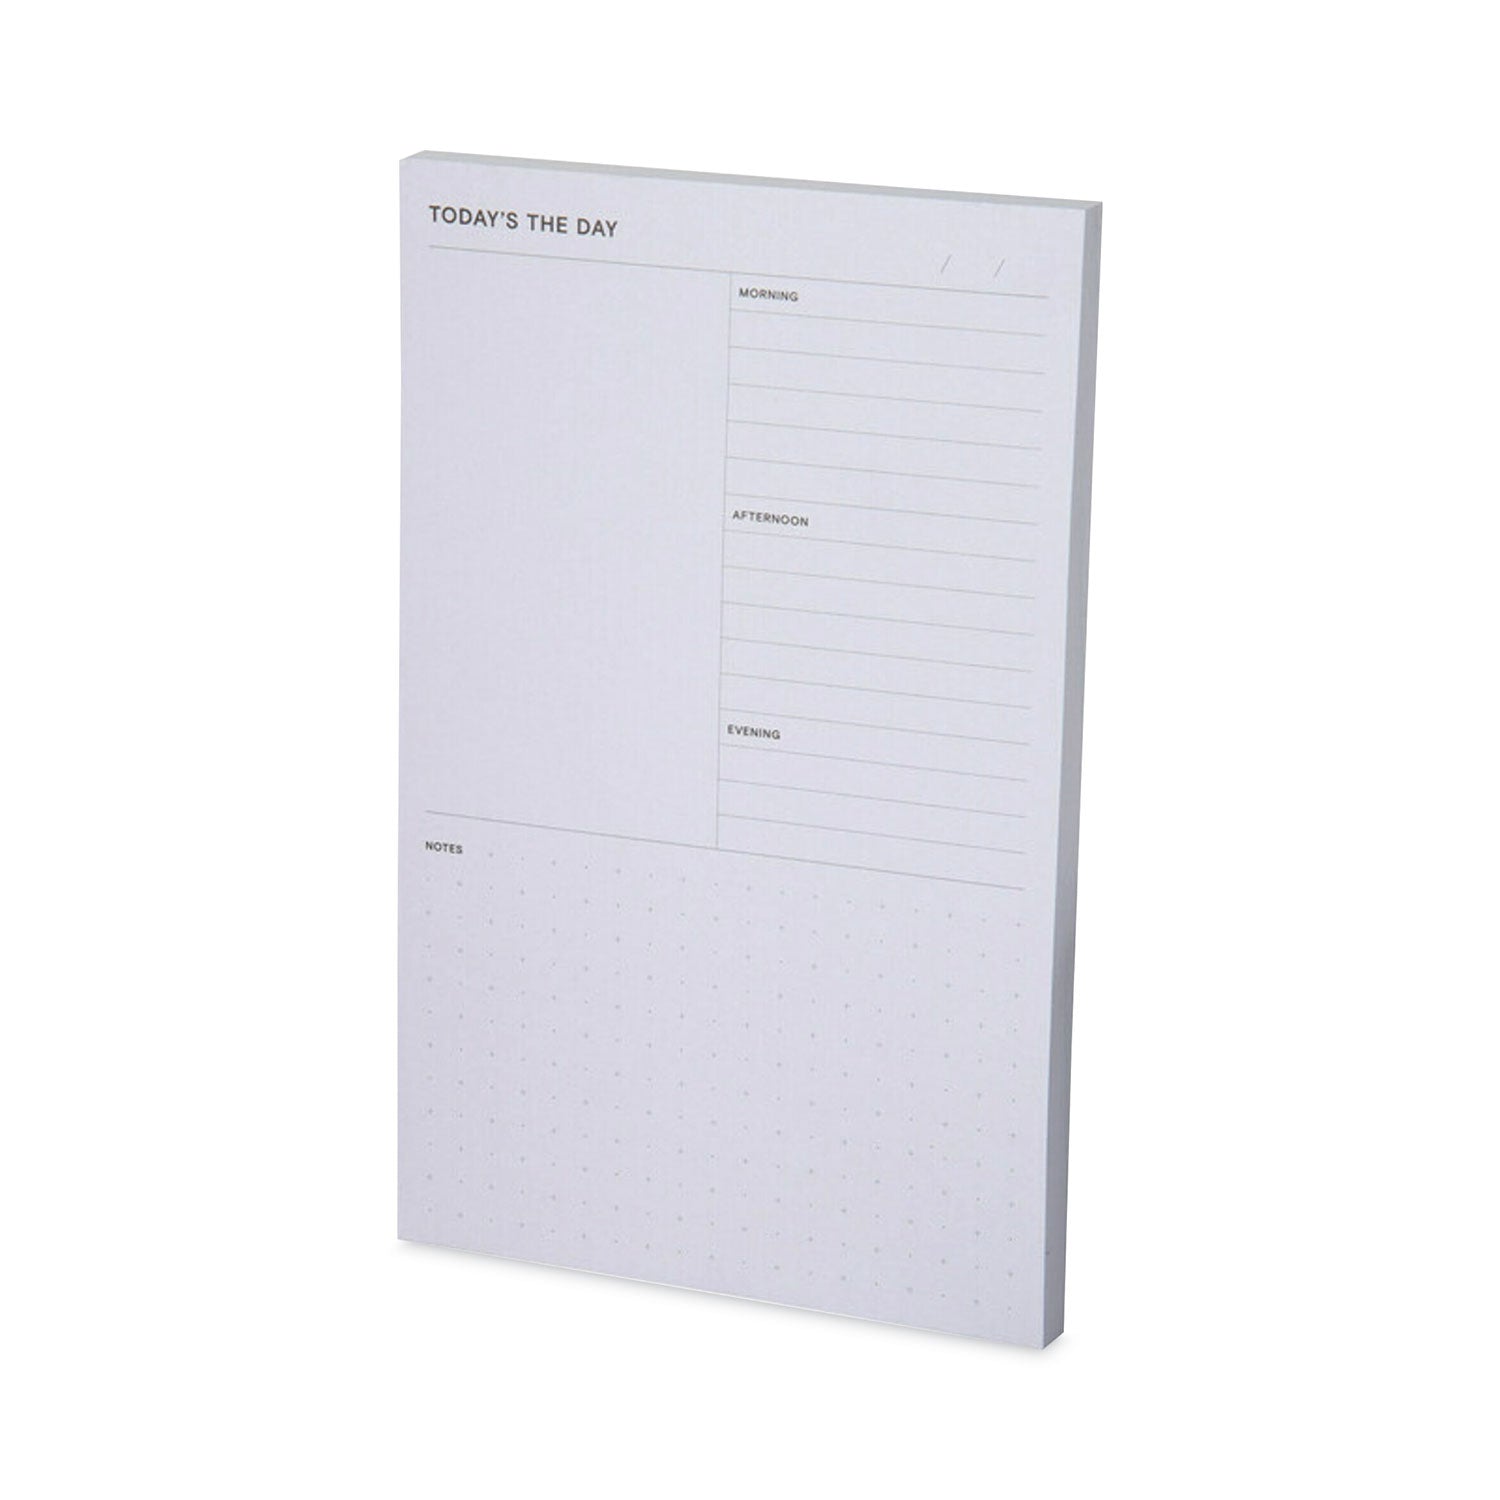 adhesive-daily-planner-sticky-note-pads-daily-planner-format-49-x-77-gray-100-sheets-pad_mmm58gry - 5